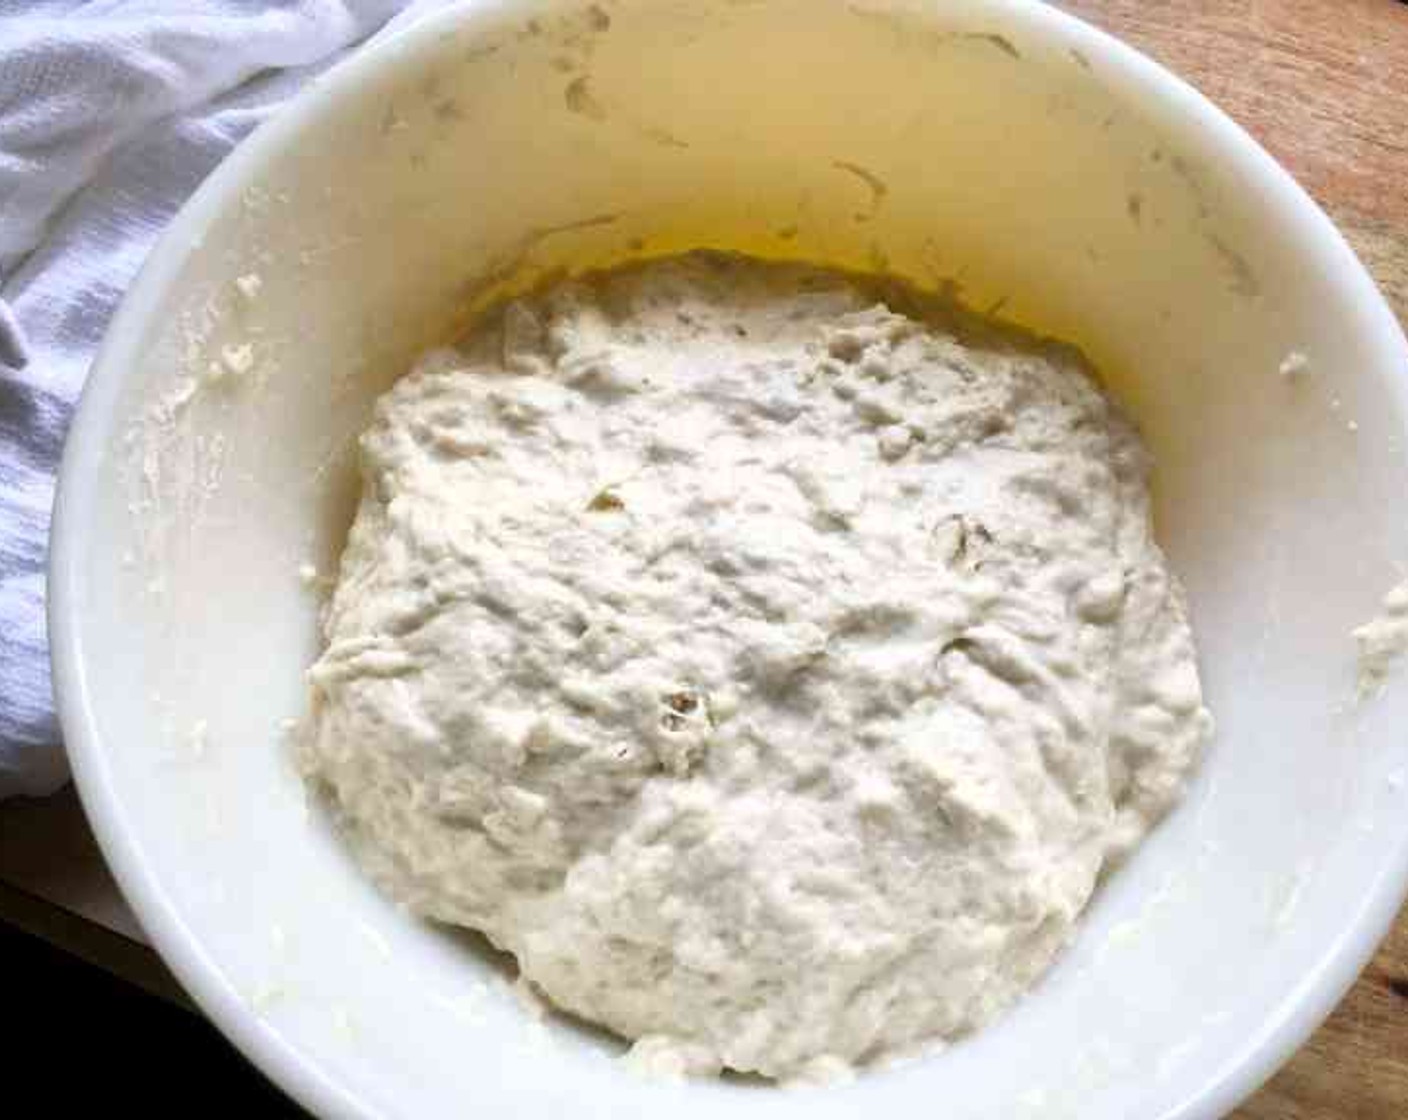 step 2 Cover the bowl with a damp cotton towel or plastic wrap. Set aside in a warm spot to rise for about 1 1/2 hours, until the dough has doubled in volume.